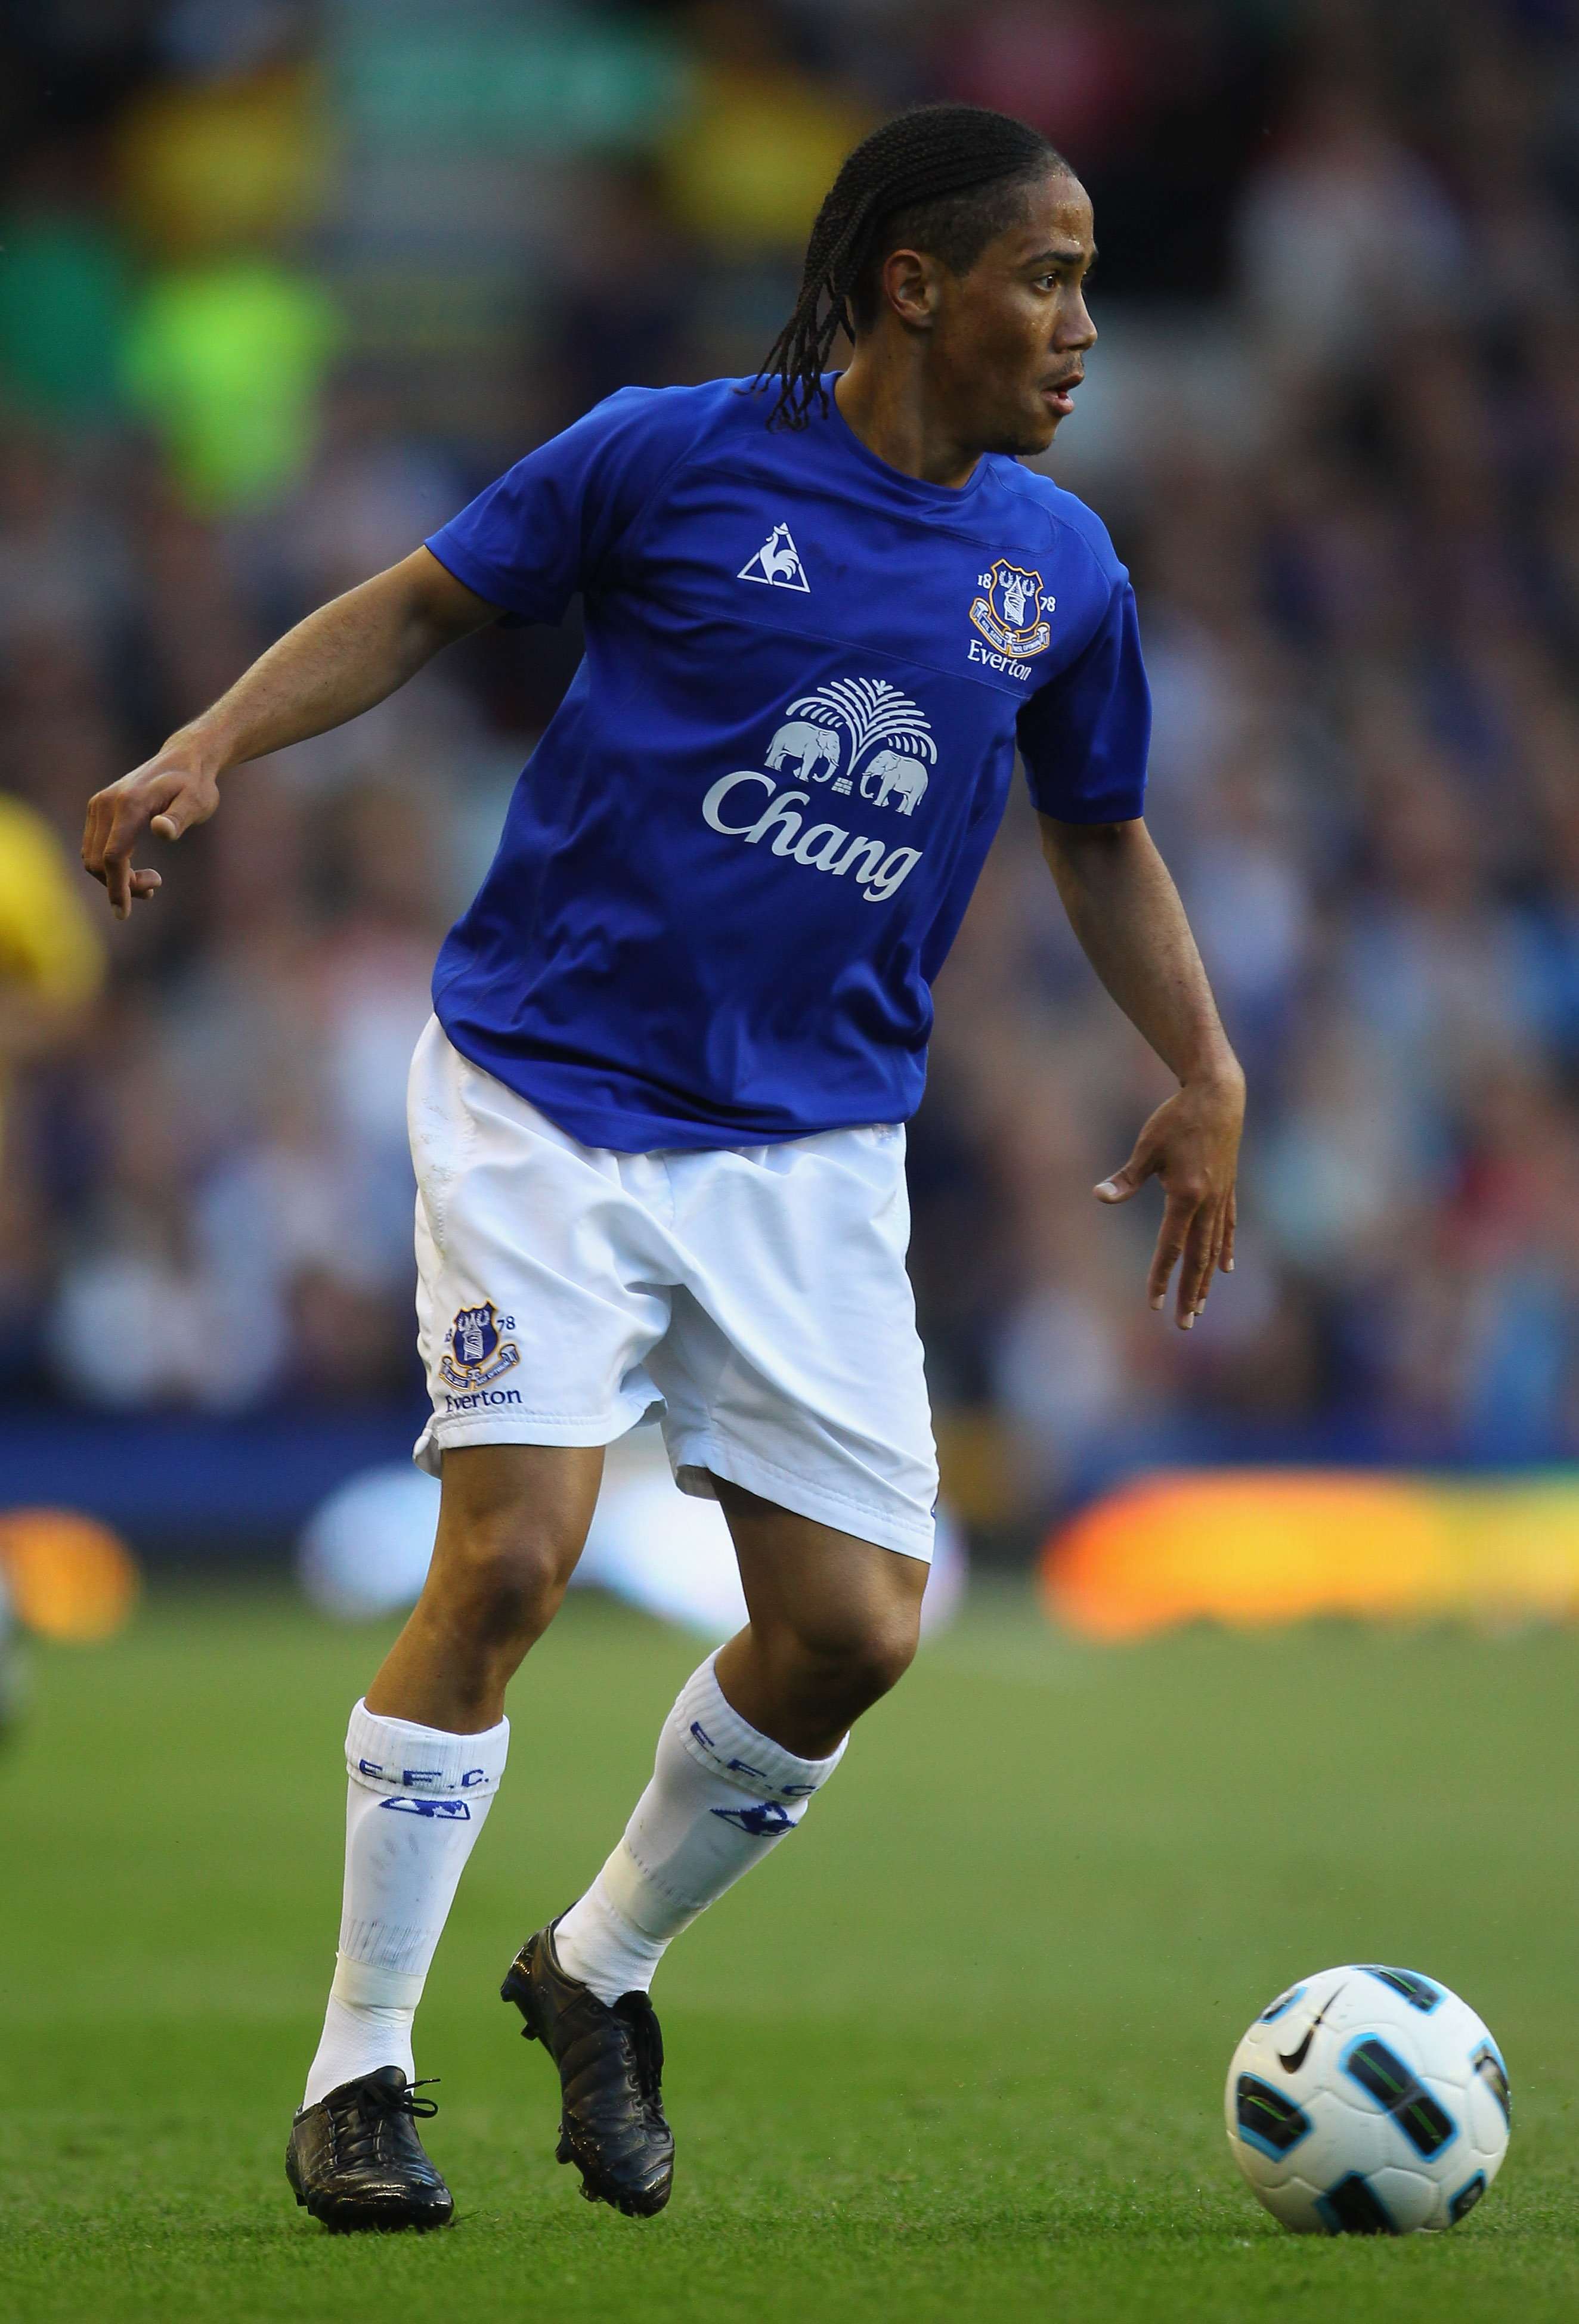 LIVERPOOL, ENGLAND - AUGUST 04:  Steven Pienaar of Everton during the pre-season friendly match between Everton and Everton Chile at Goodison Park on August 4, 2010 in Liverpool, England.  (Photo by Alex Livesey/Getty Images)